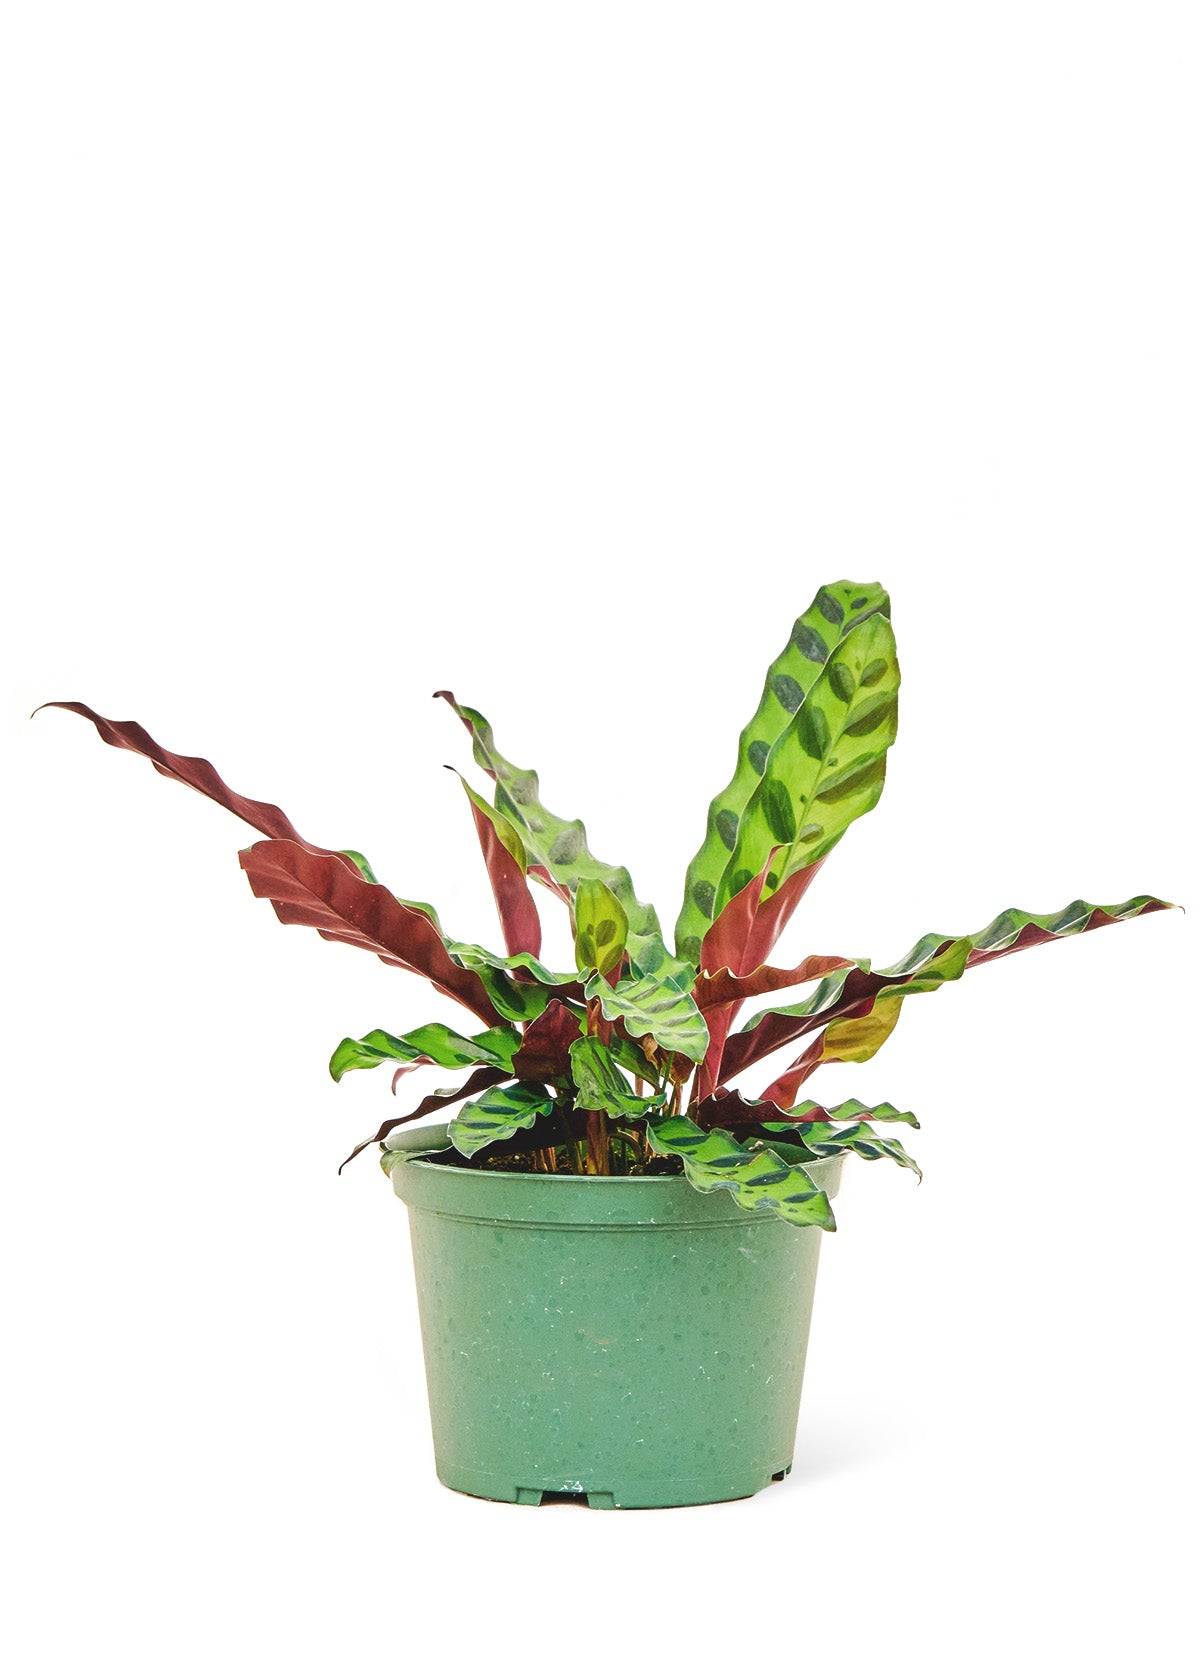 Medium size Calathea Rattlesnake plant in a growers pot with a white background